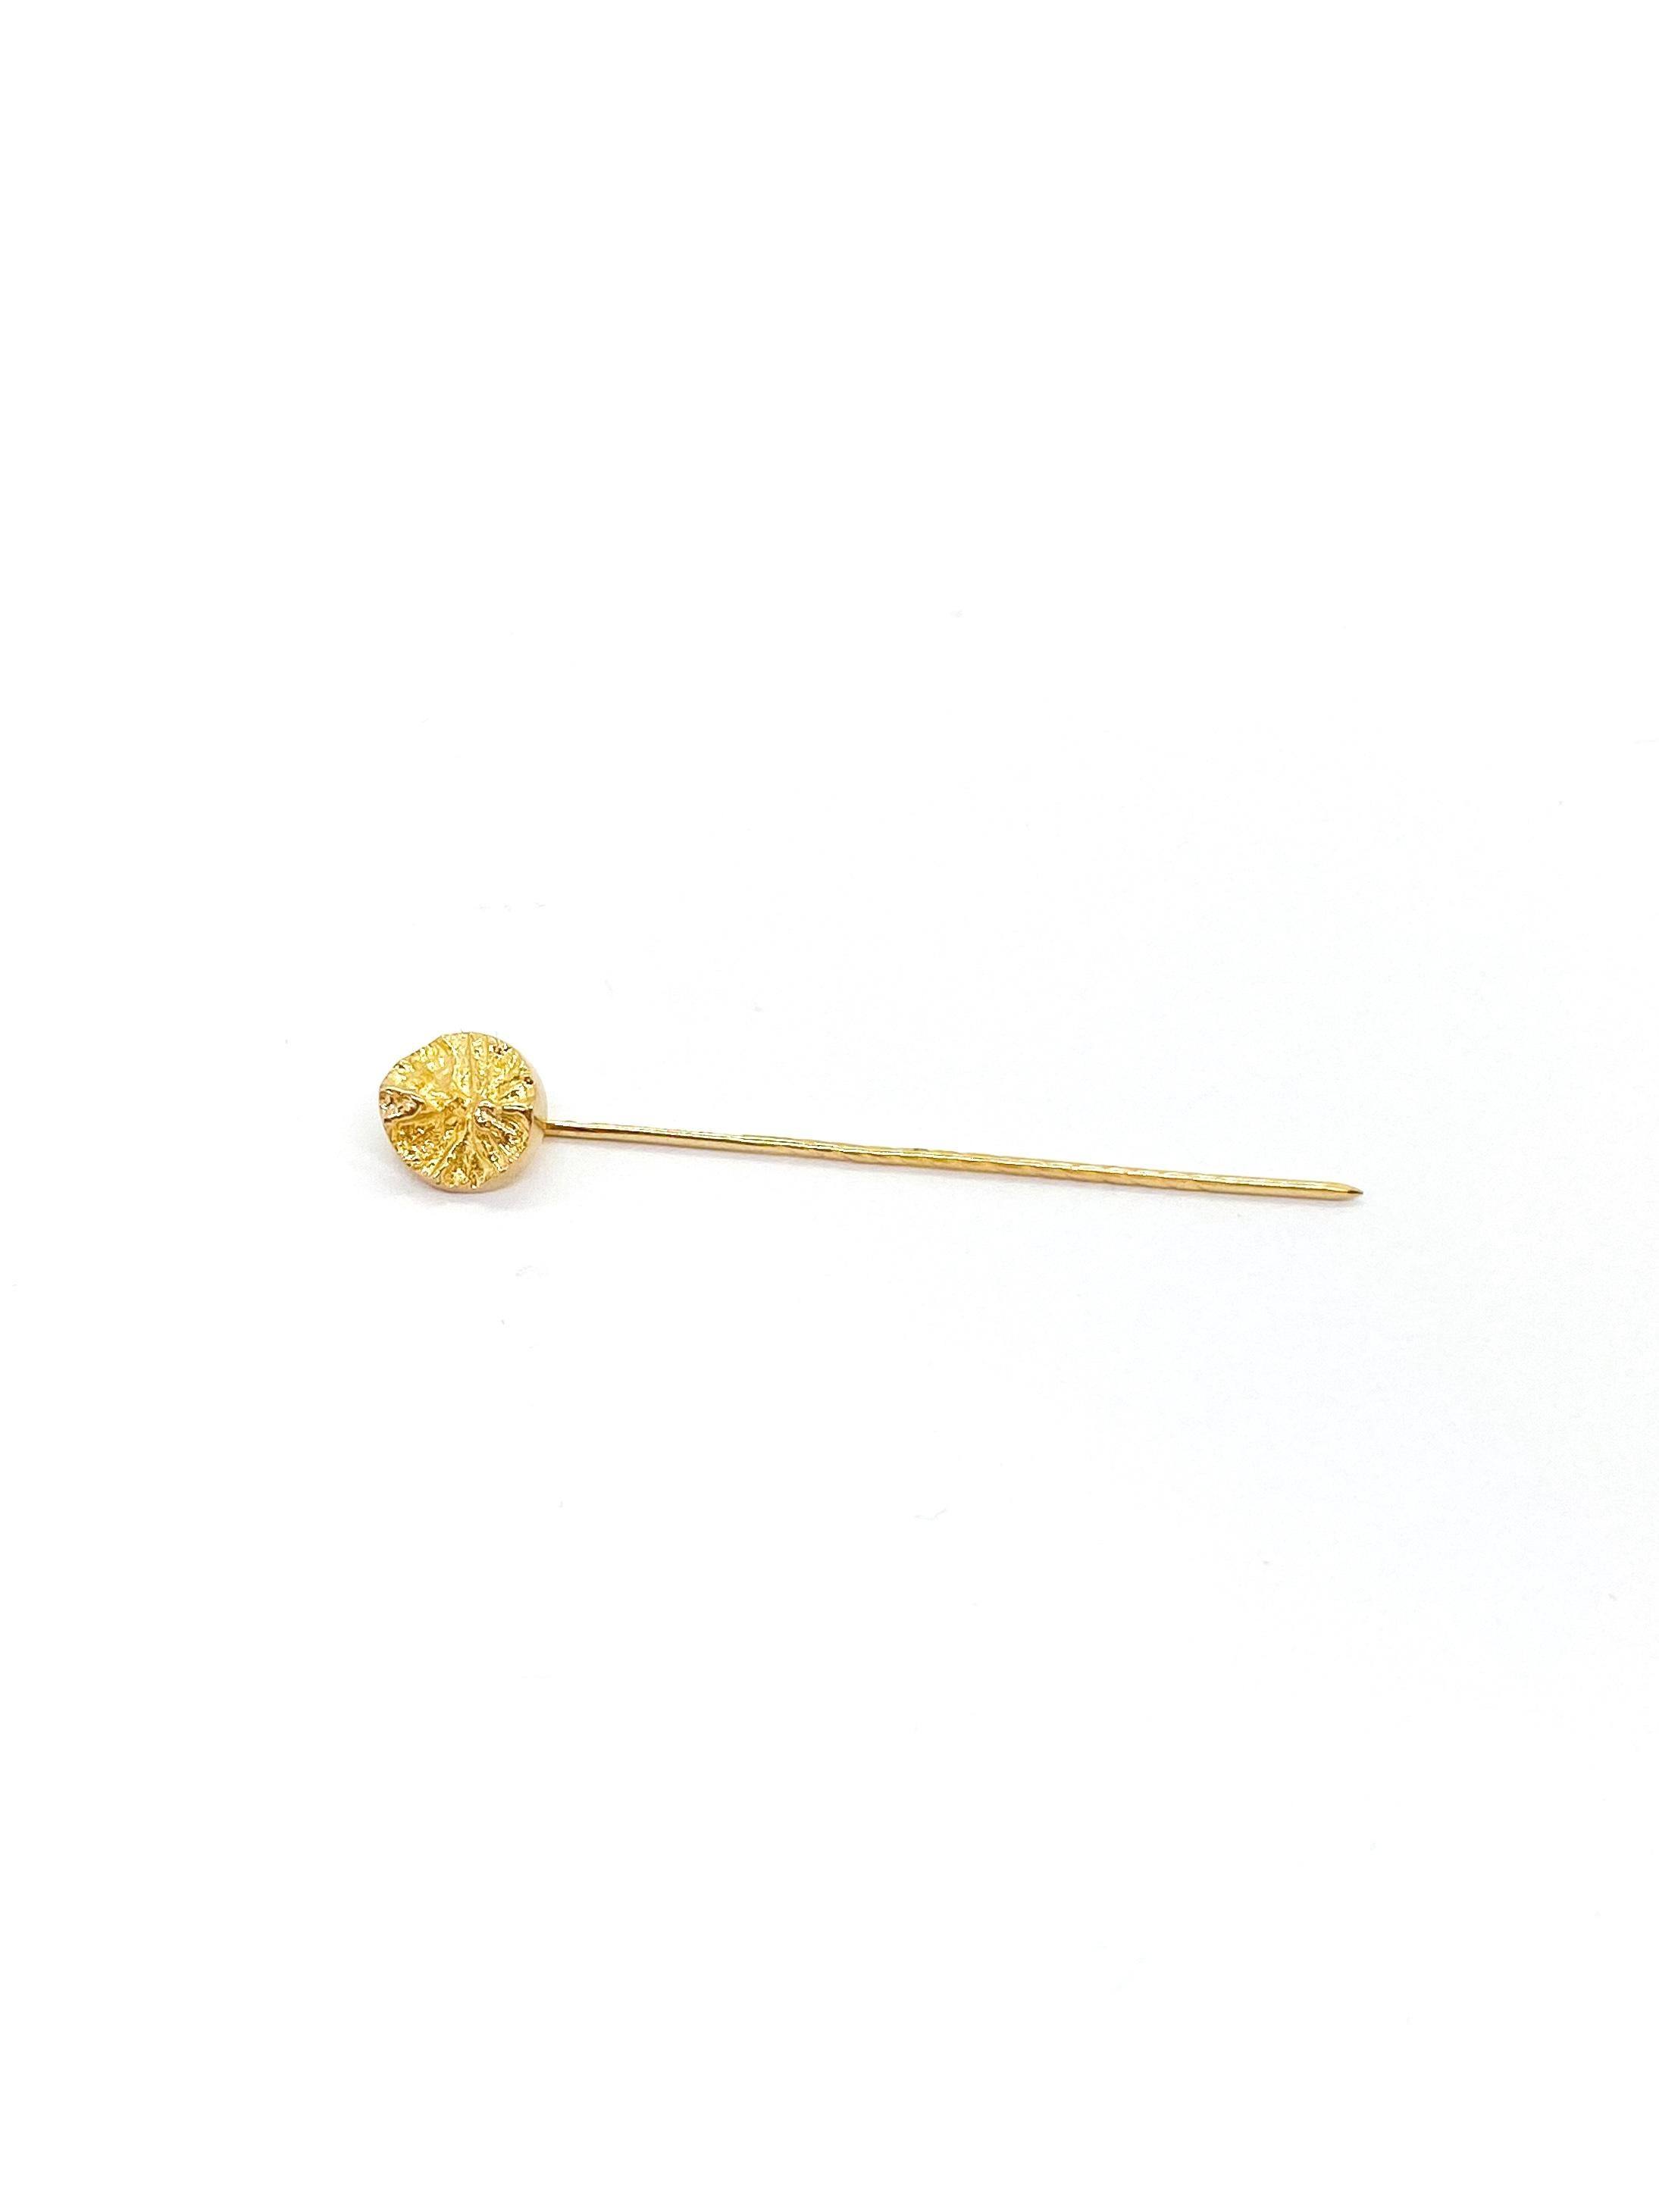 14 Karat Yellow Gold Björn Weckström Stickpin 1980 Lapponia Finland
Completely unused store stock.
Very good condition. (New)

I have several Lapponian Jewelry designed by Björn Weckström for sale, see group photo.

Rough matt surfaces, uncut